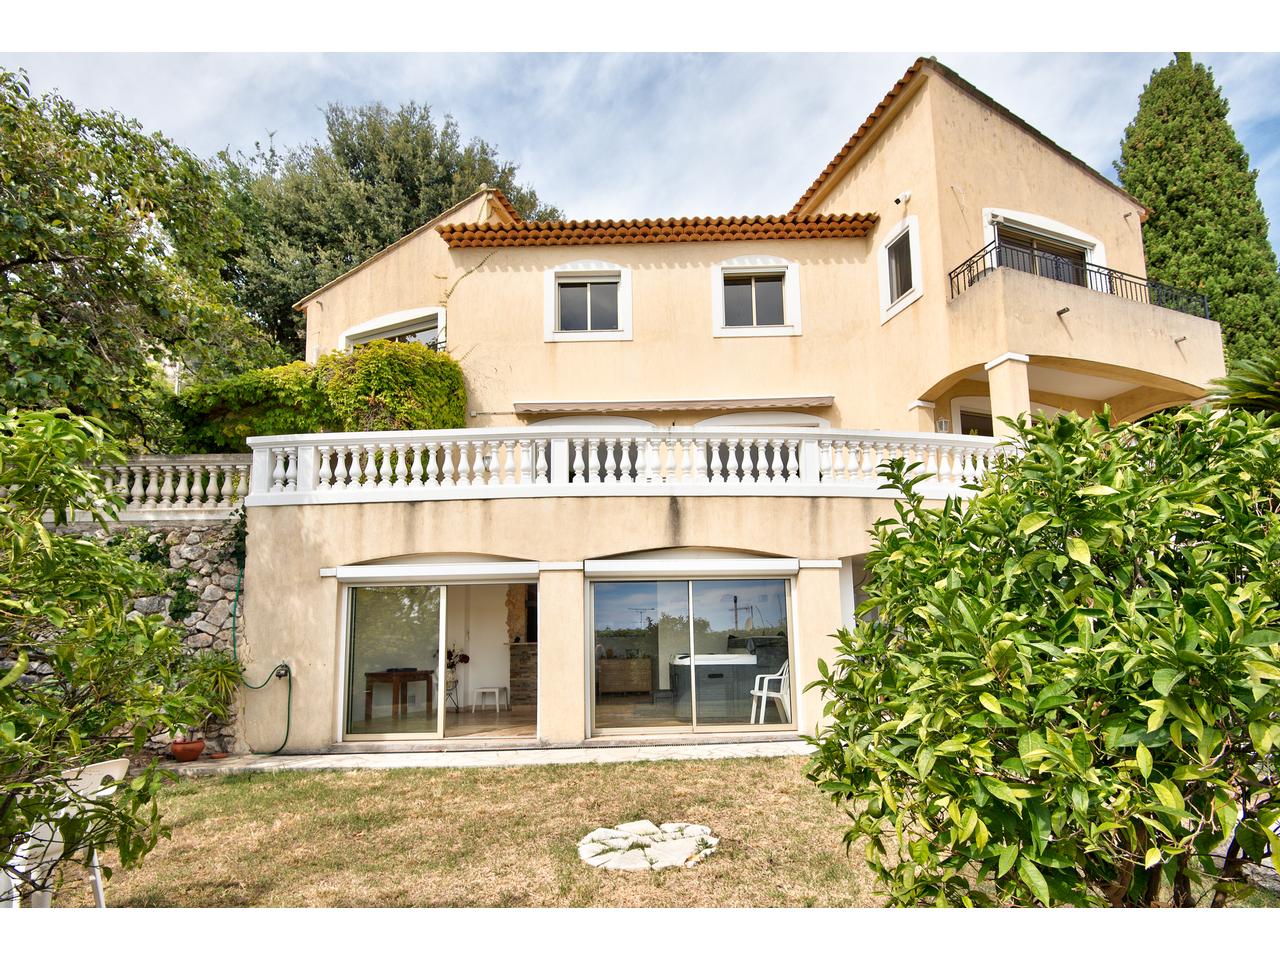 Nice Riviera - Agence Immobiliére Nice Côte d'Azur|House 7 Rooms 331m2  for sale  3 850 000 €